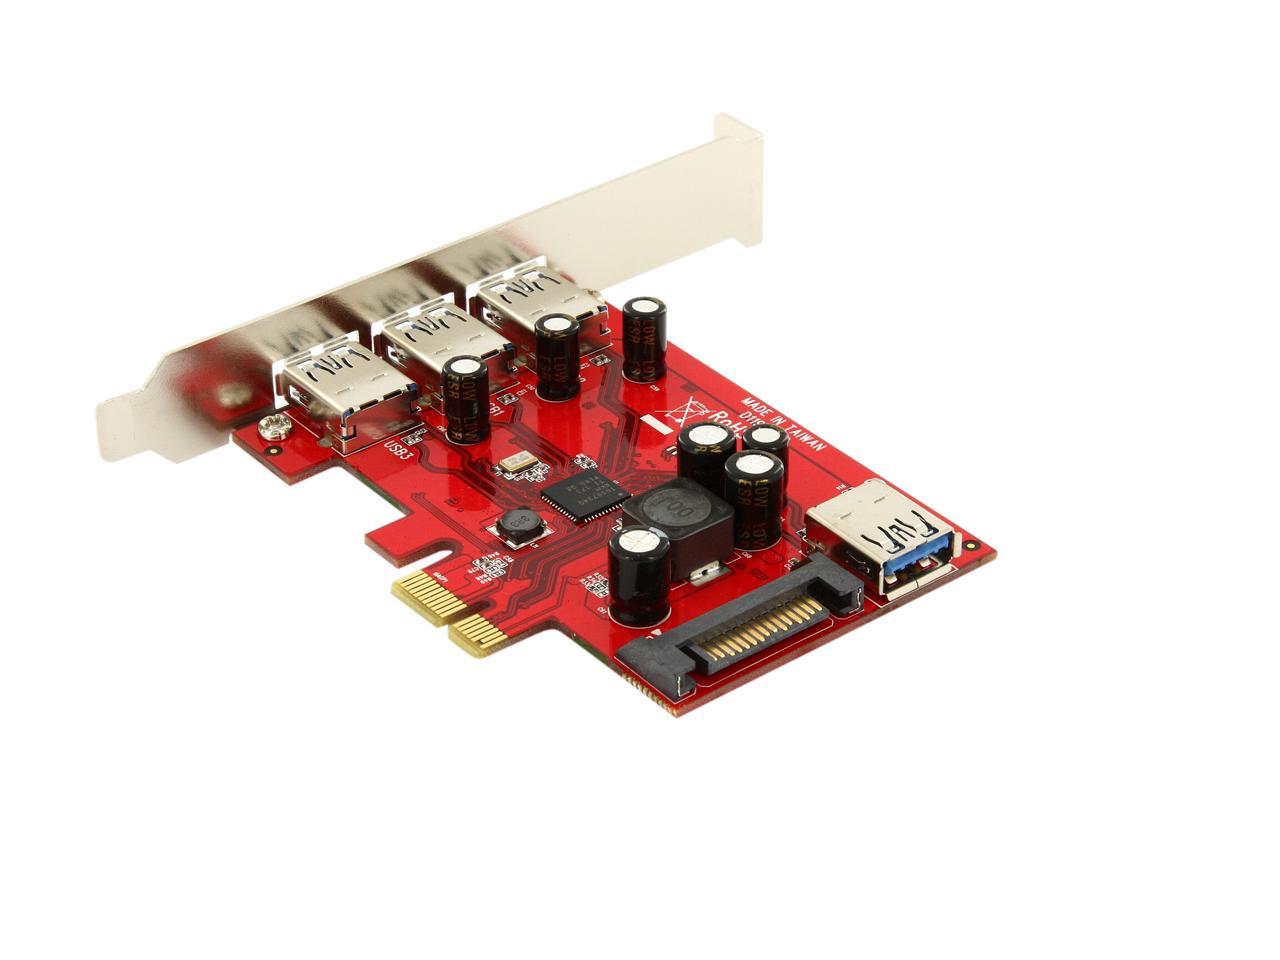 4 port superspeed usb 3.0 pci express card with molex